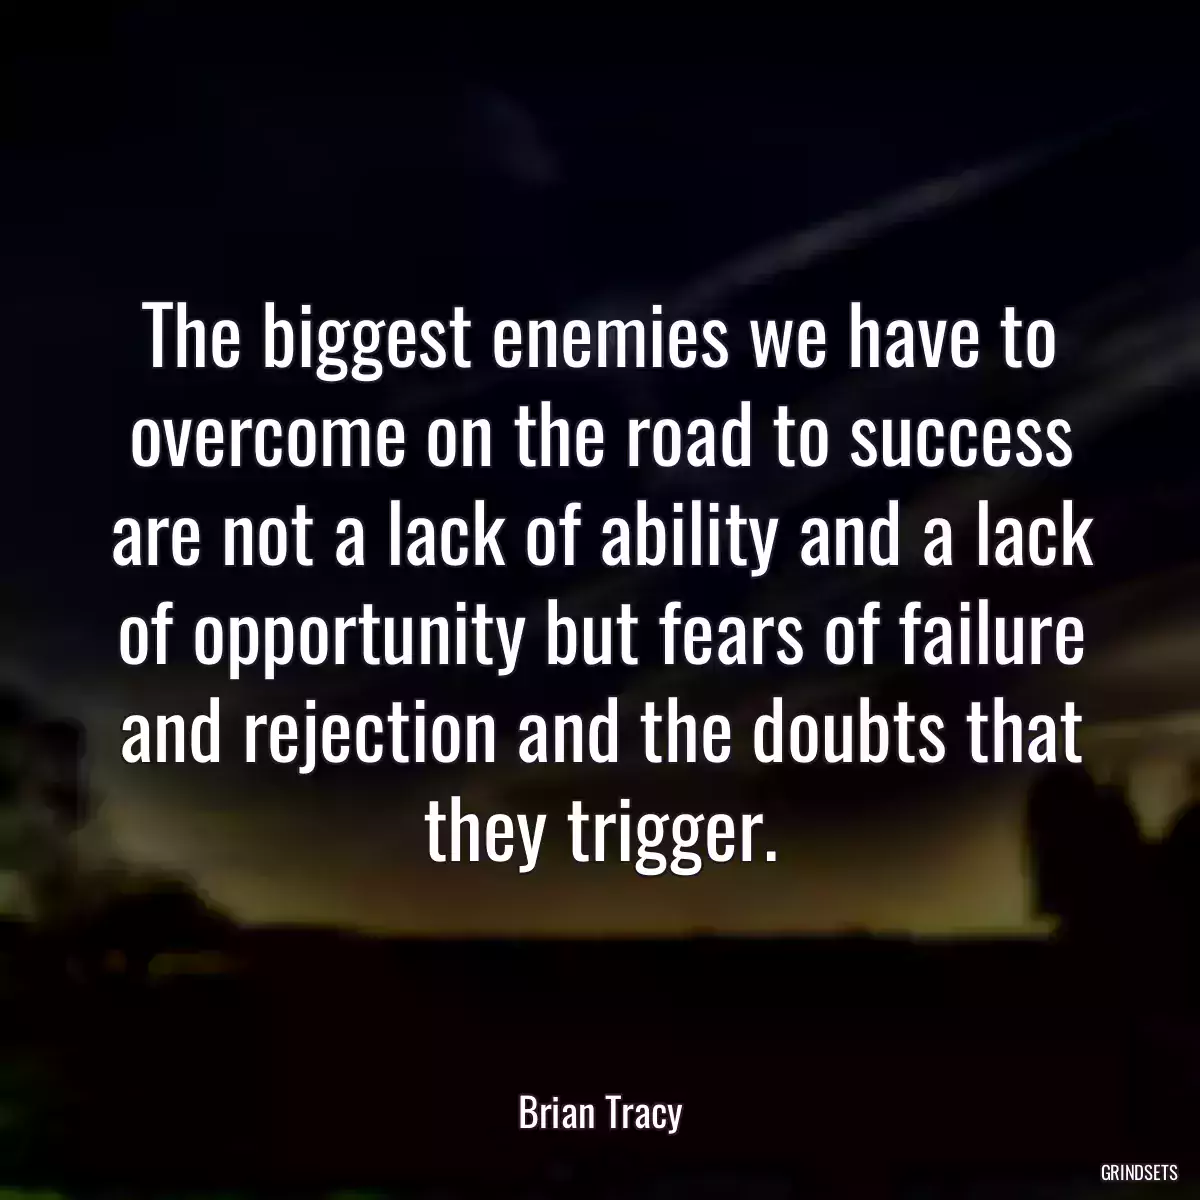 The biggest enemies we have to overcome on the road to success are not a lack of ability and a lack of opportunity but fears of failure and rejection and the doubts that they trigger.